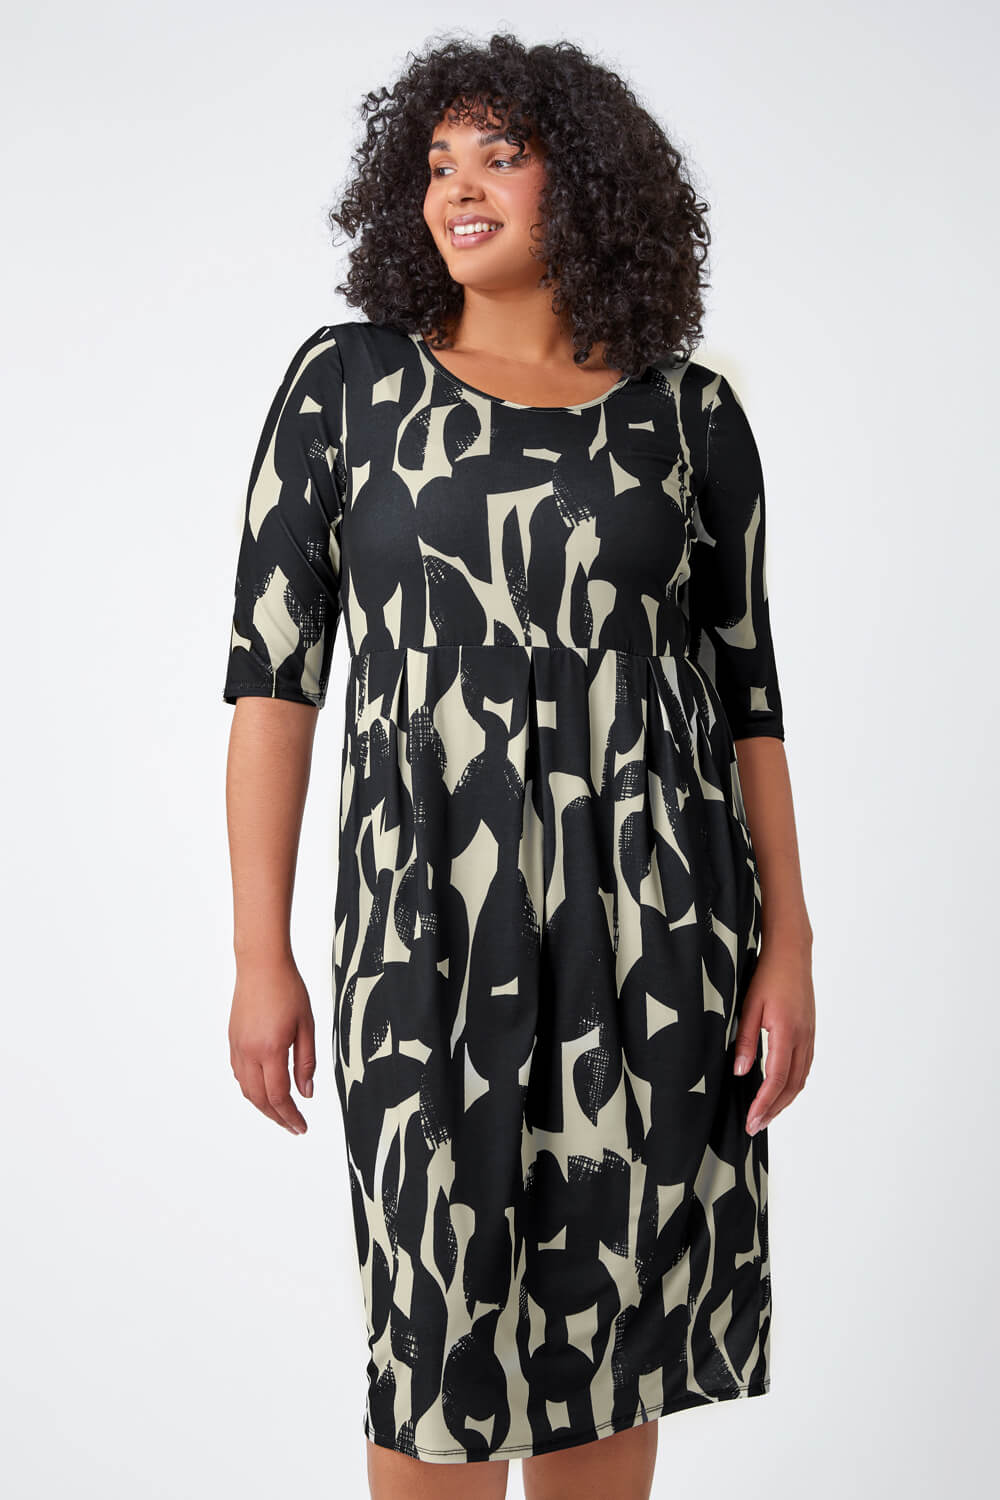 Black Curve Abstract Print Stretch Dress, Image 4 of 5